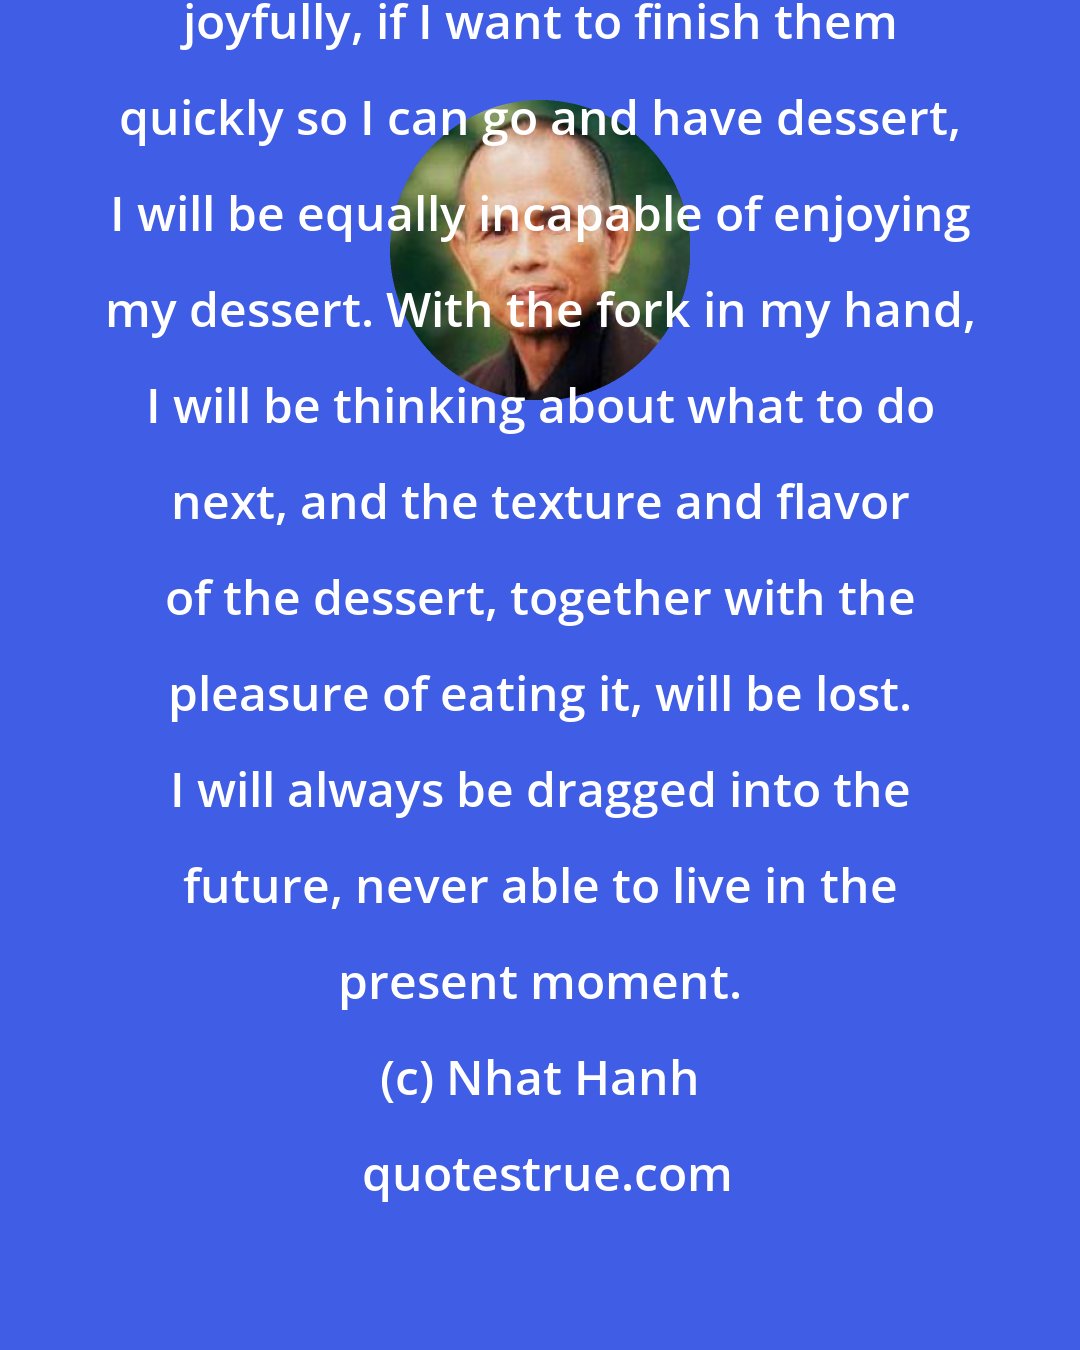 Nhat Hanh: If I am incapable of washing dishes joyfully, if I want to finish them quickly so I can go and have dessert, I will be equally incapable of enjoying my dessert. With the fork in my hand, I will be thinking about what to do next, and the texture and flavor of the dessert, together with the pleasure of eating it, will be lost. I will always be dragged into the future, never able to live in the present moment.